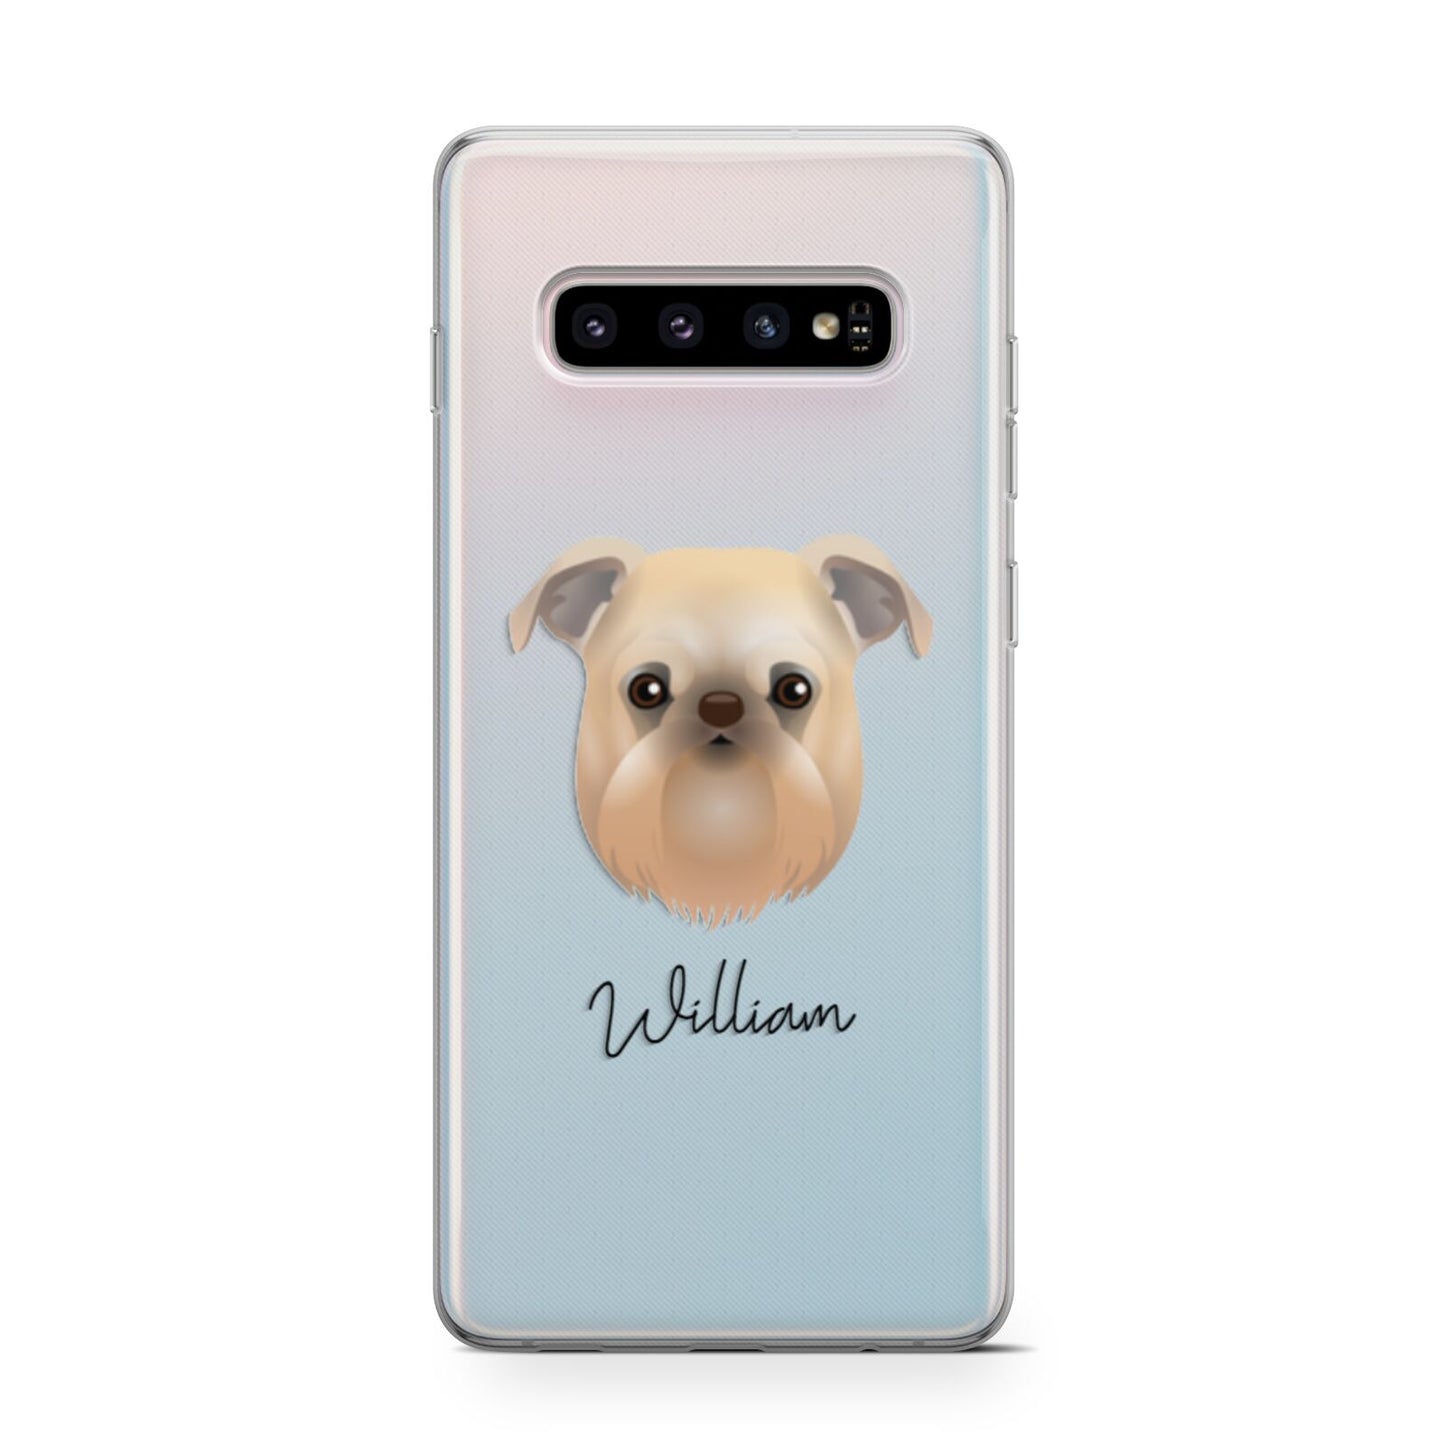 Griffon Bruxellois Personalised Samsung Galaxy S10 Case